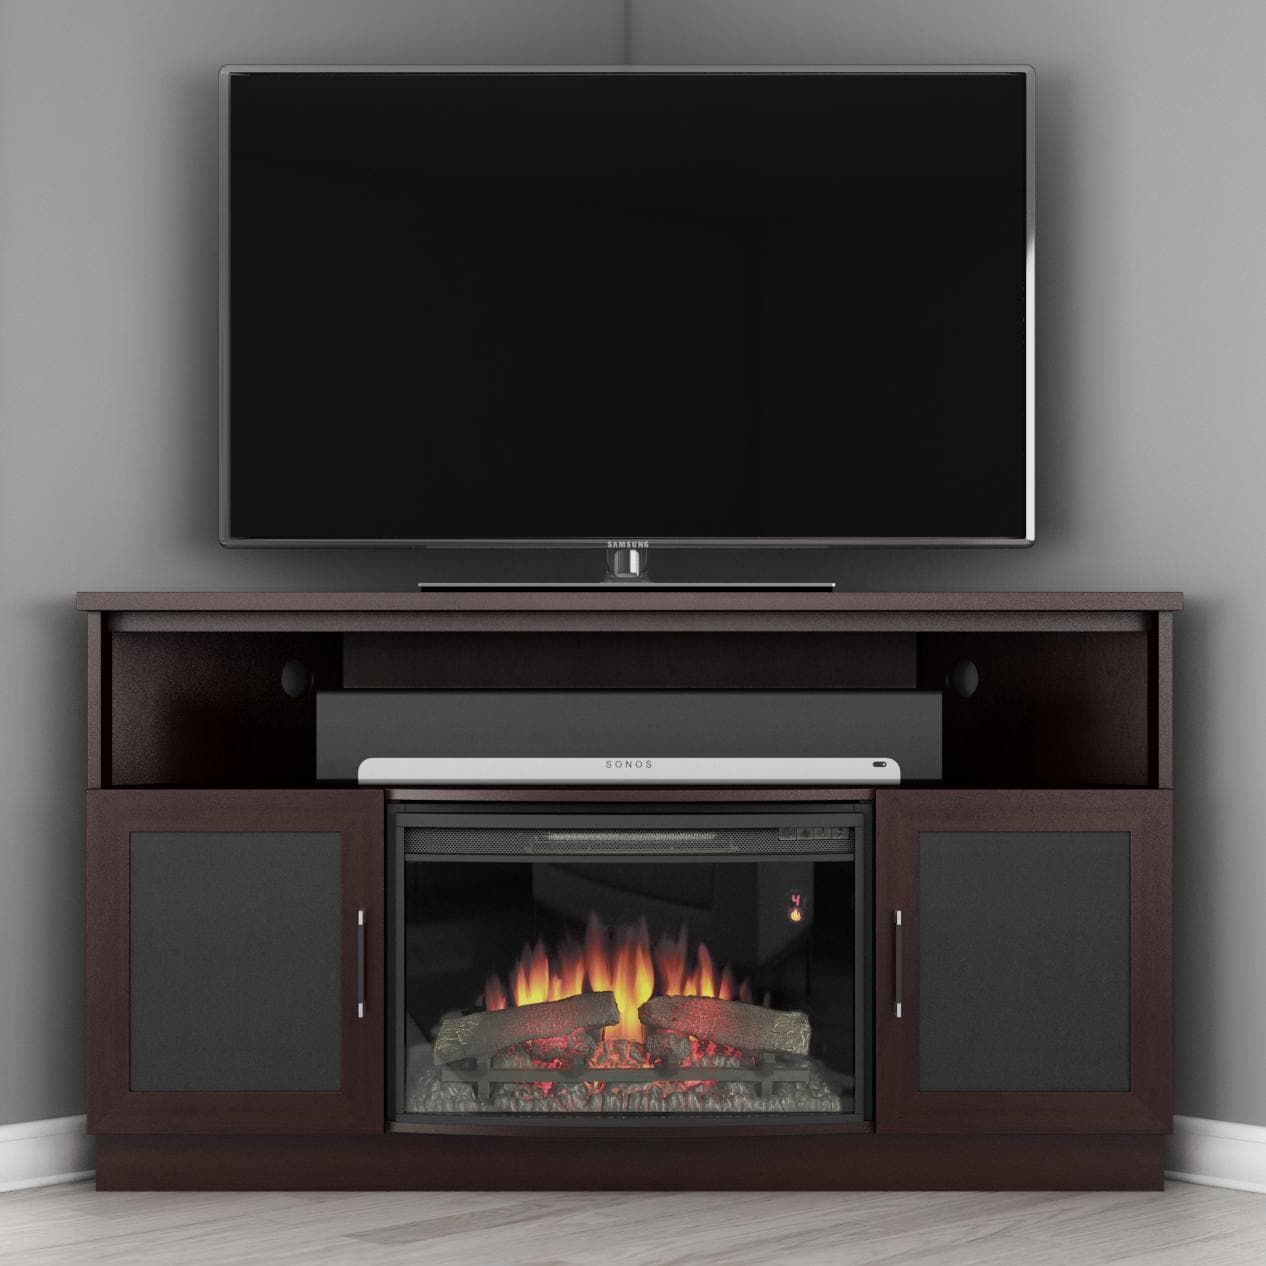 Best Electric Fireplace Entertainment Centers | 2019 : Bbqguys With Electric Fireplace Entertainment Centers (View 17 of 20)